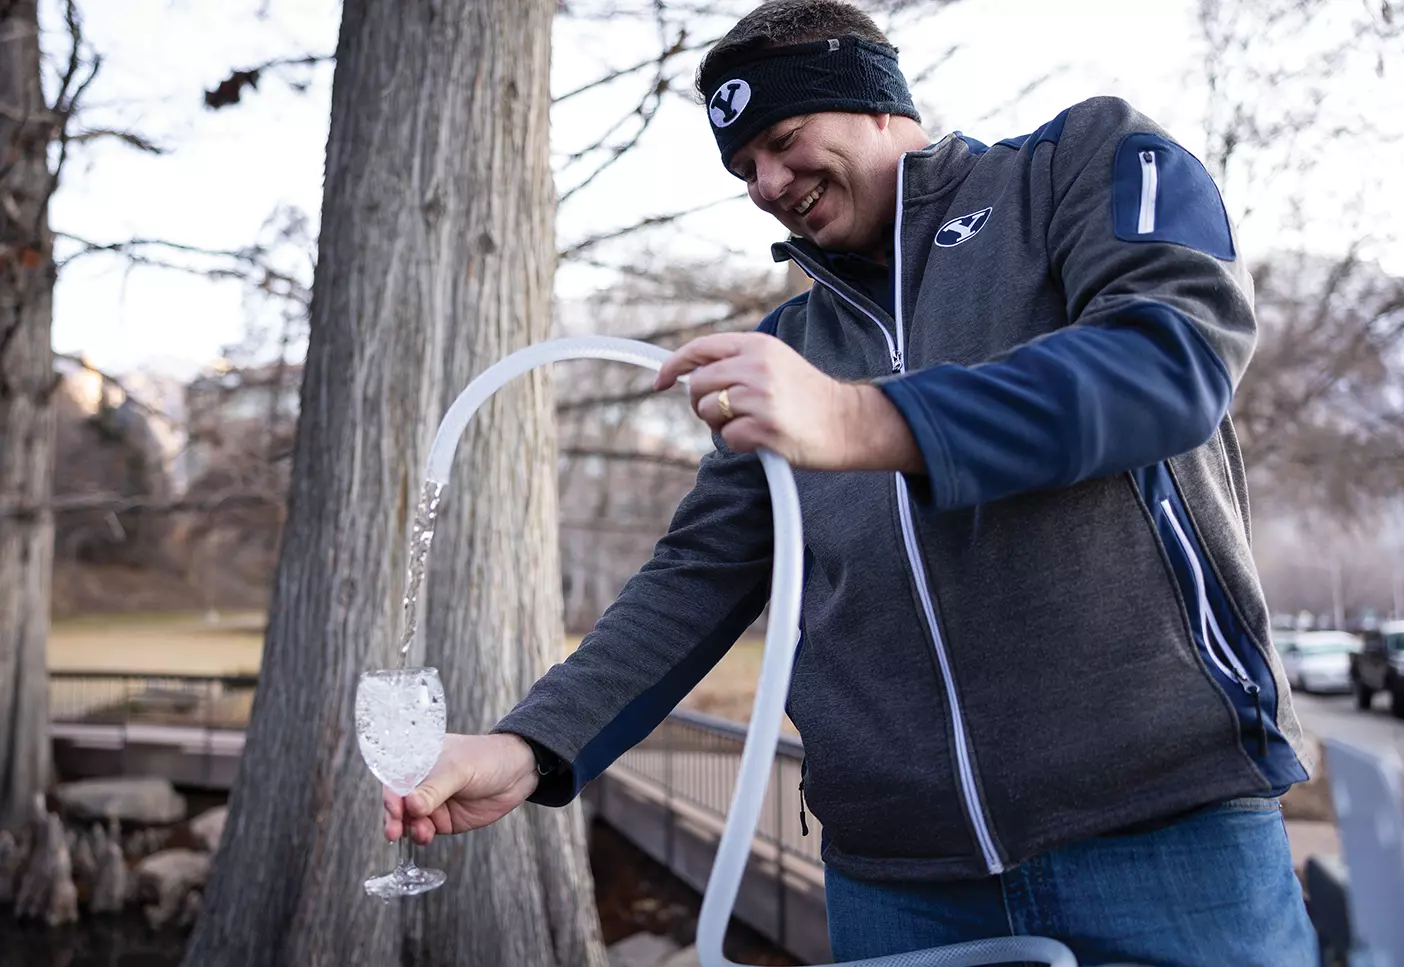 A smiling man pours water from the duck pond into a cup